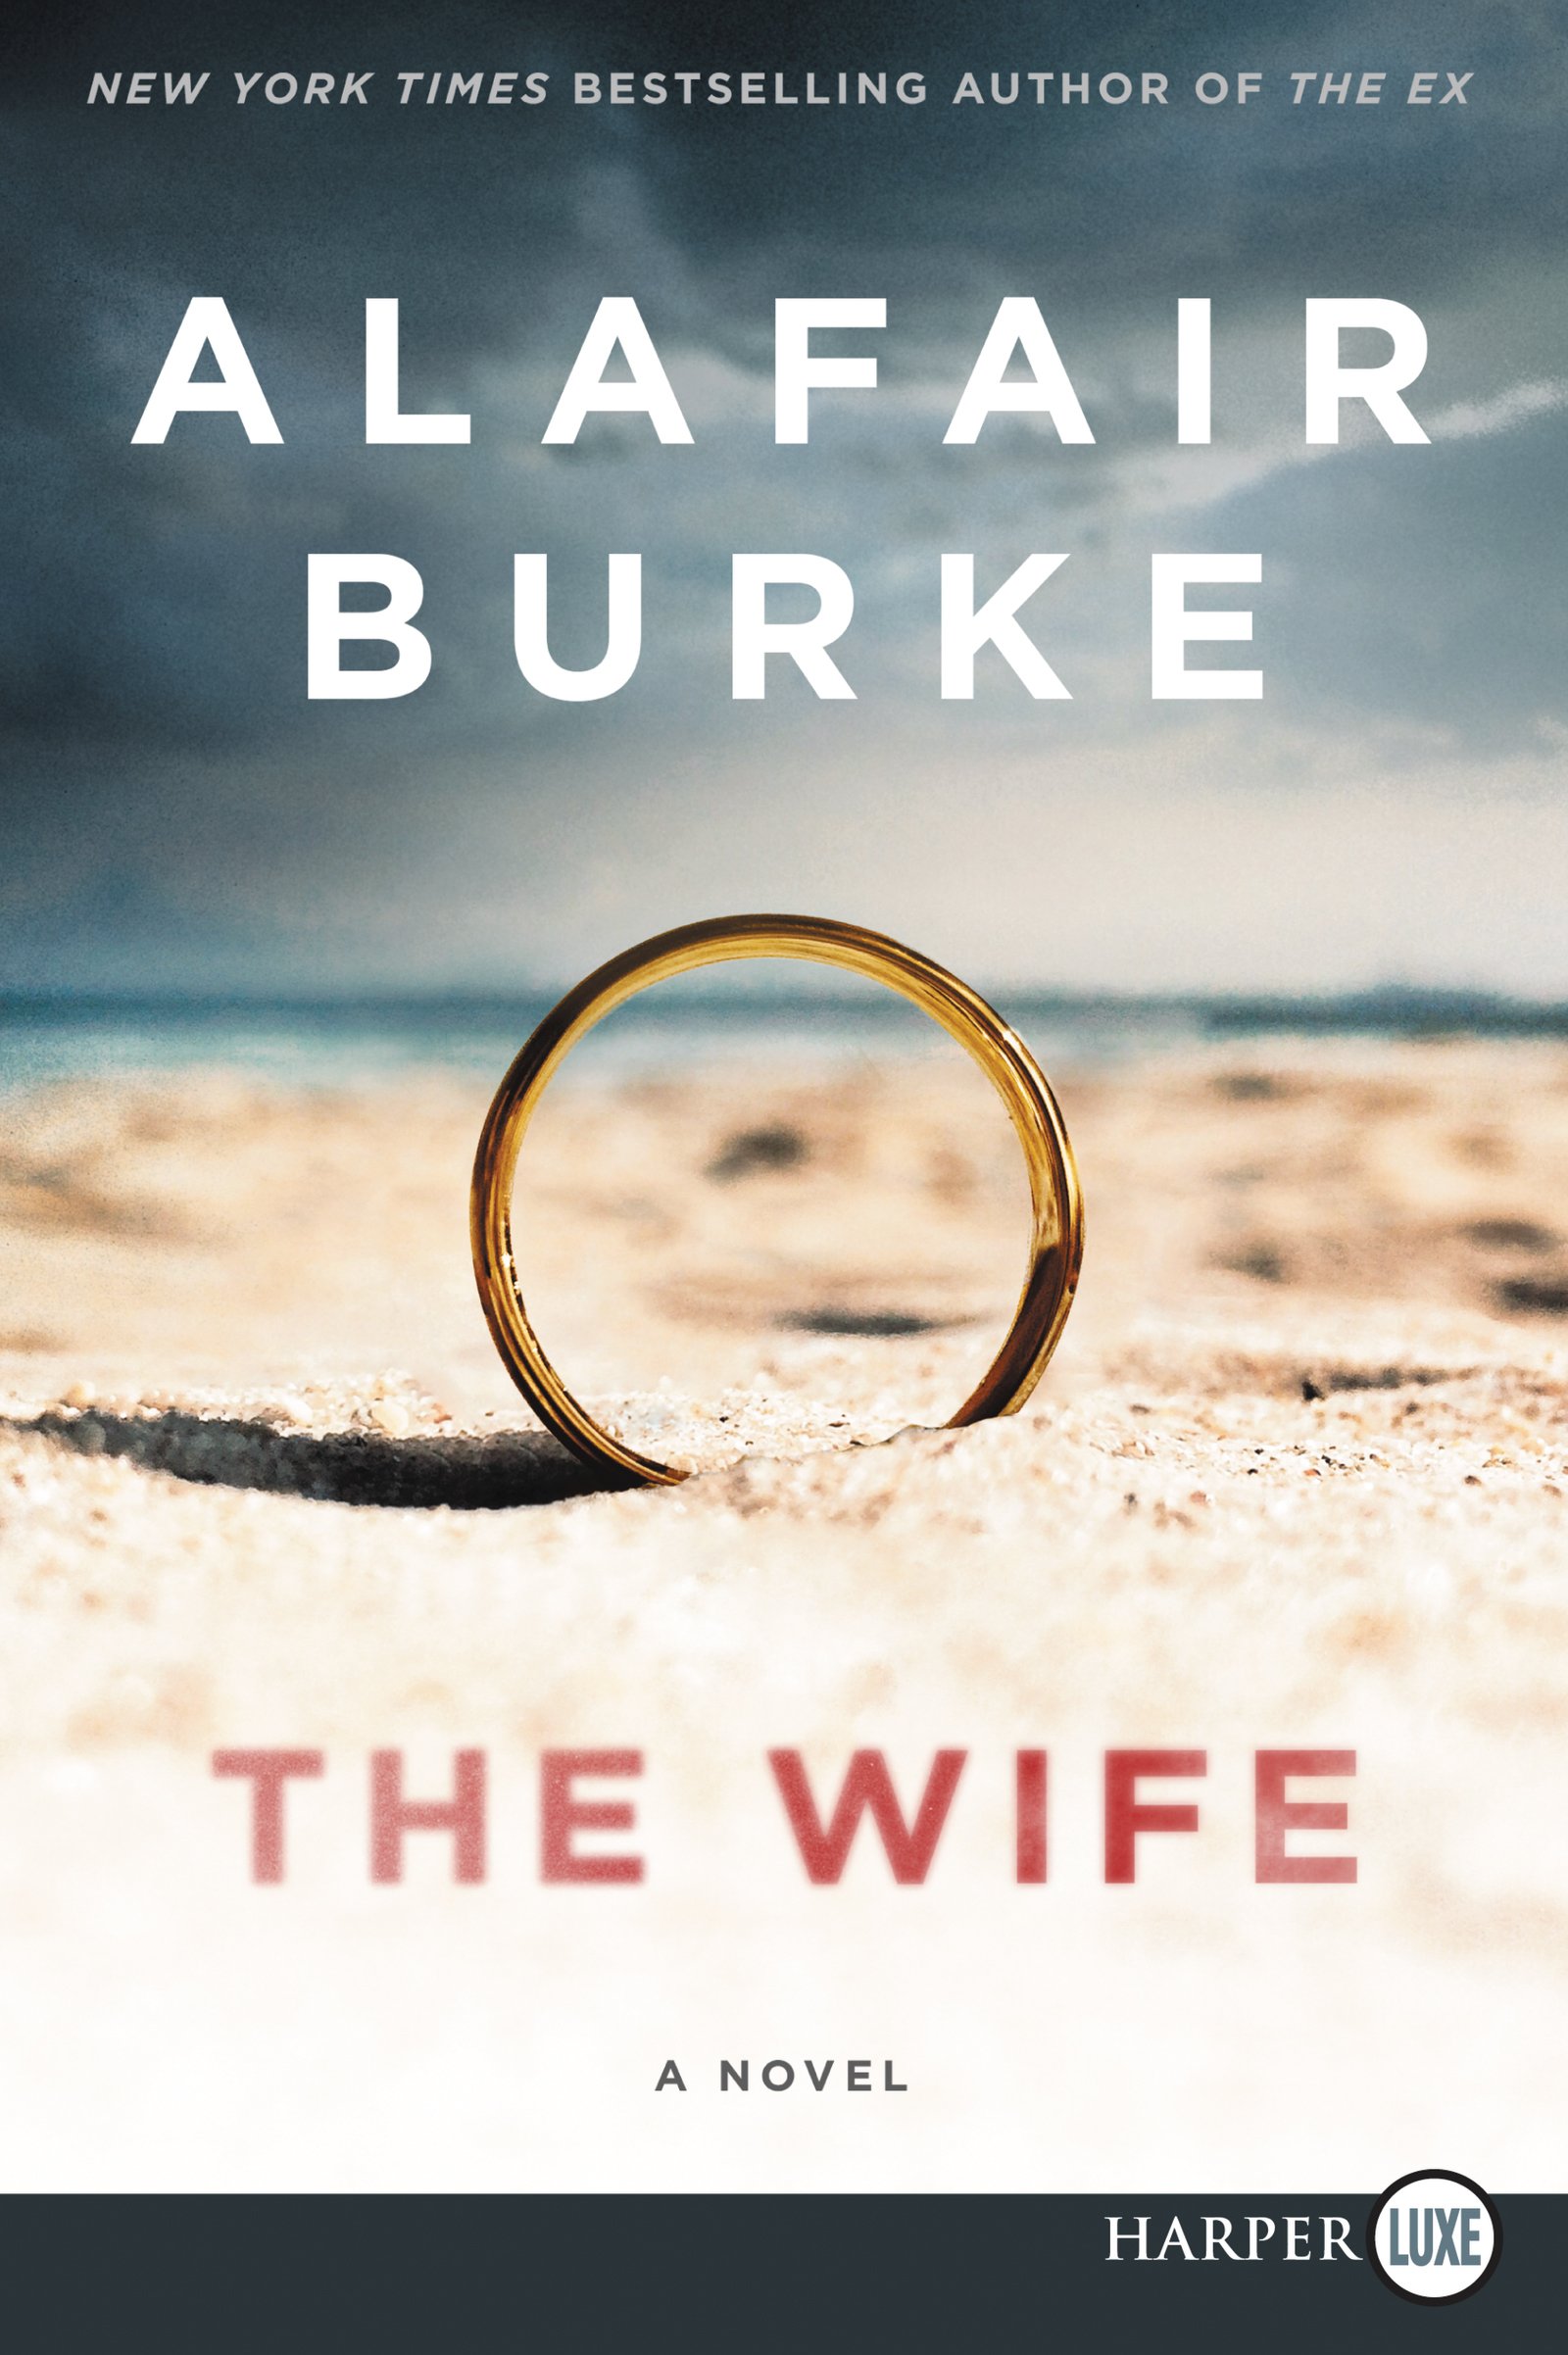 A book cover for The Wife